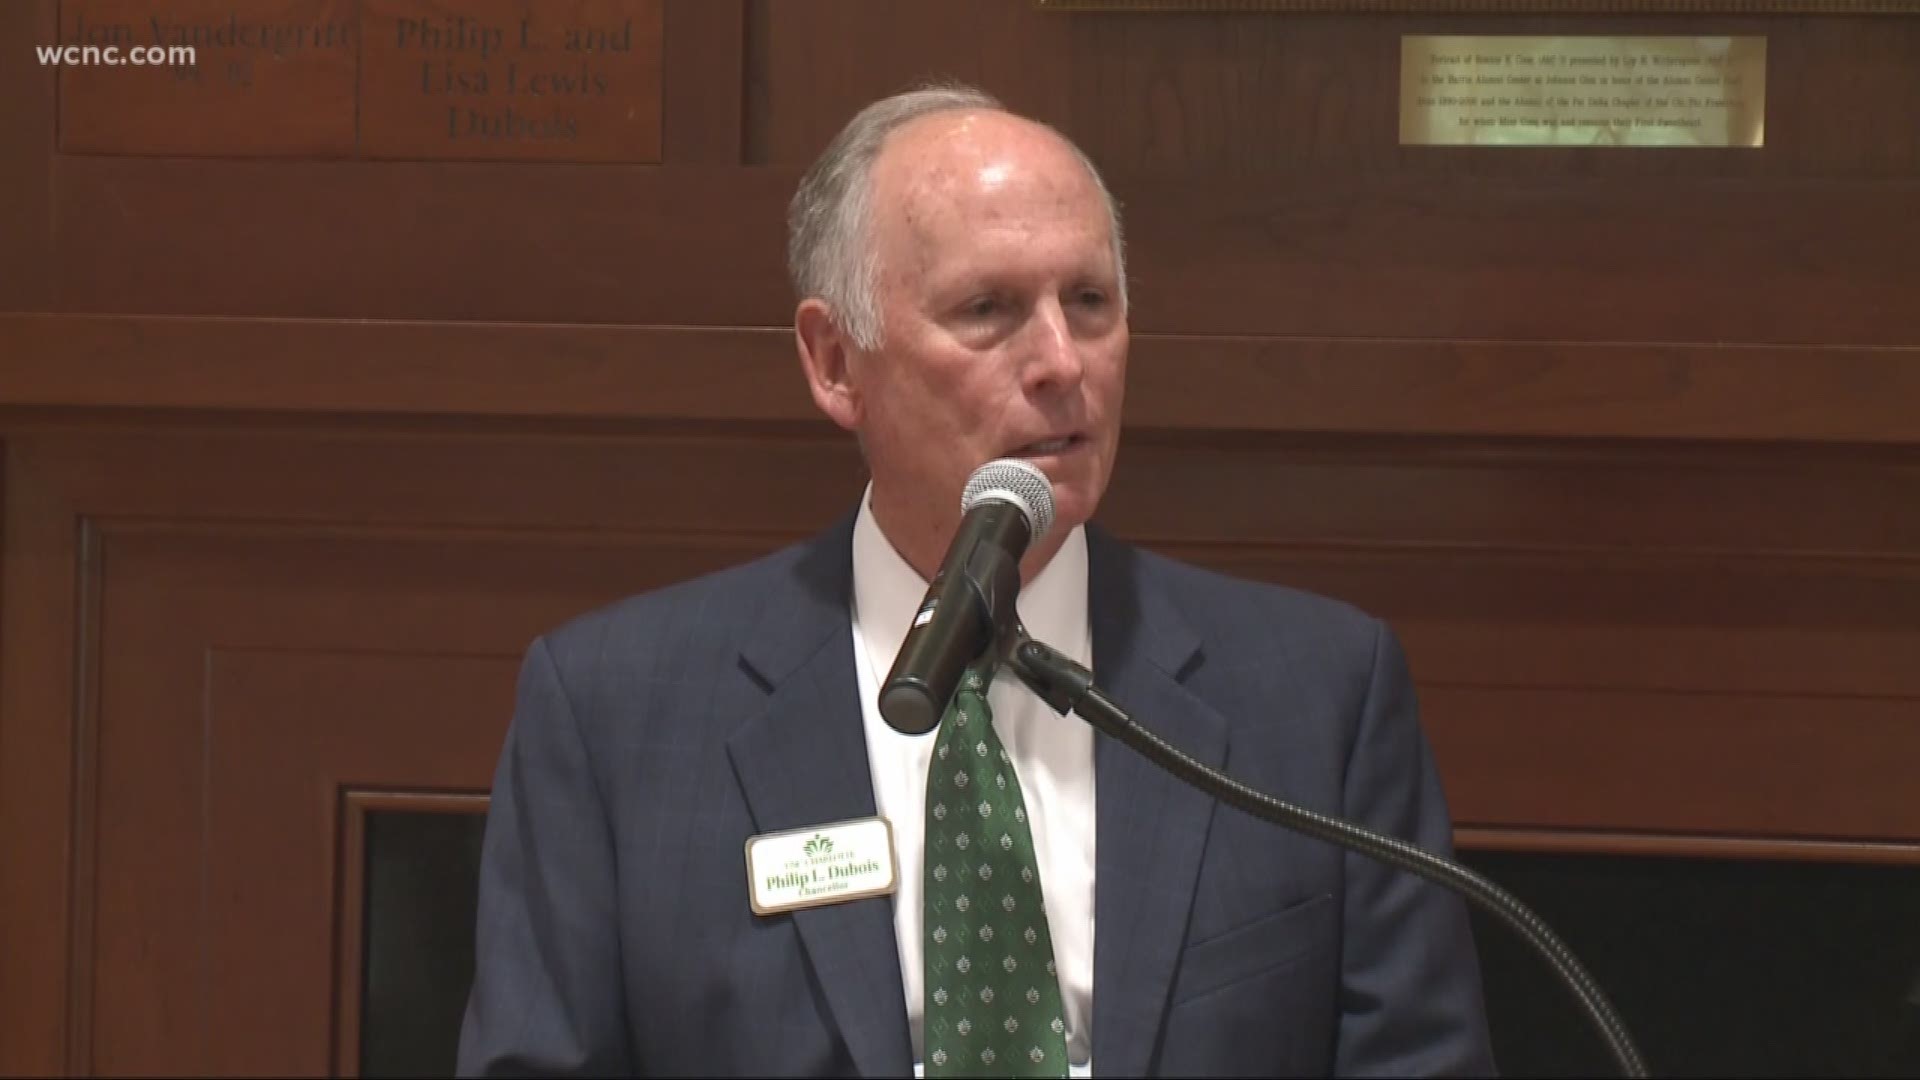 This school year will be the last for UNC Charlotte Chancellor Philip Dubois. He will officially retire June 30 of next year.